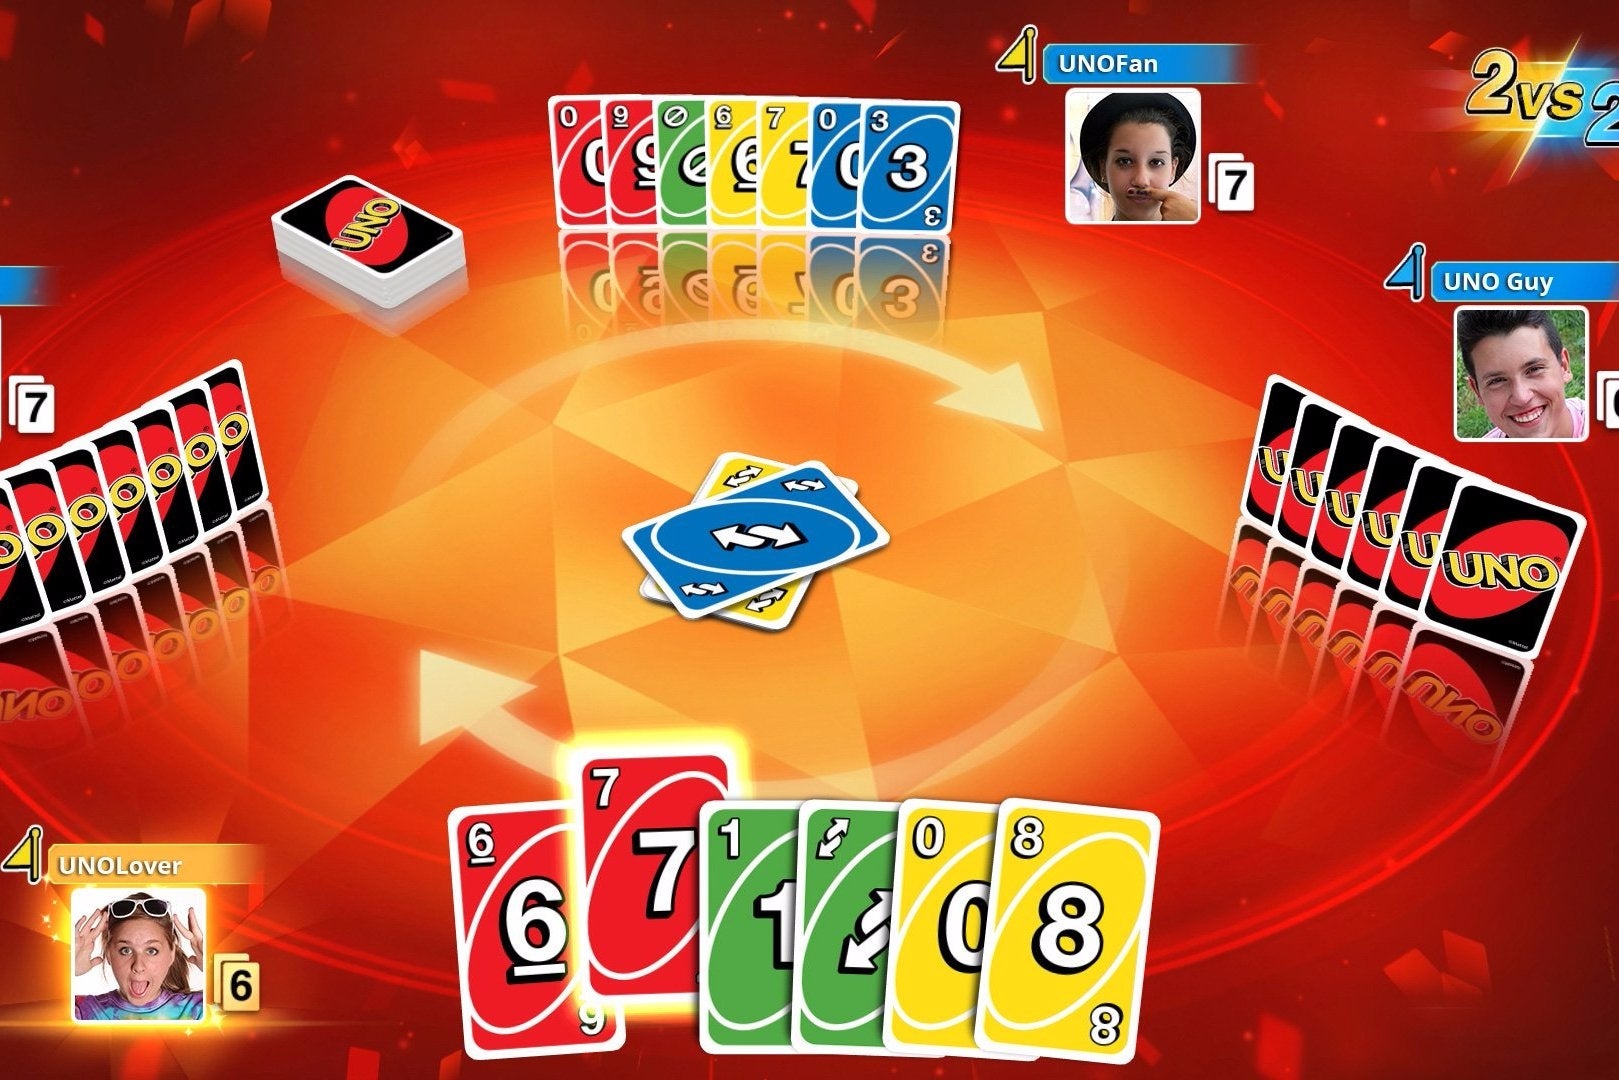 Image for Uno is coming to PS4, Xbox One and PC next month